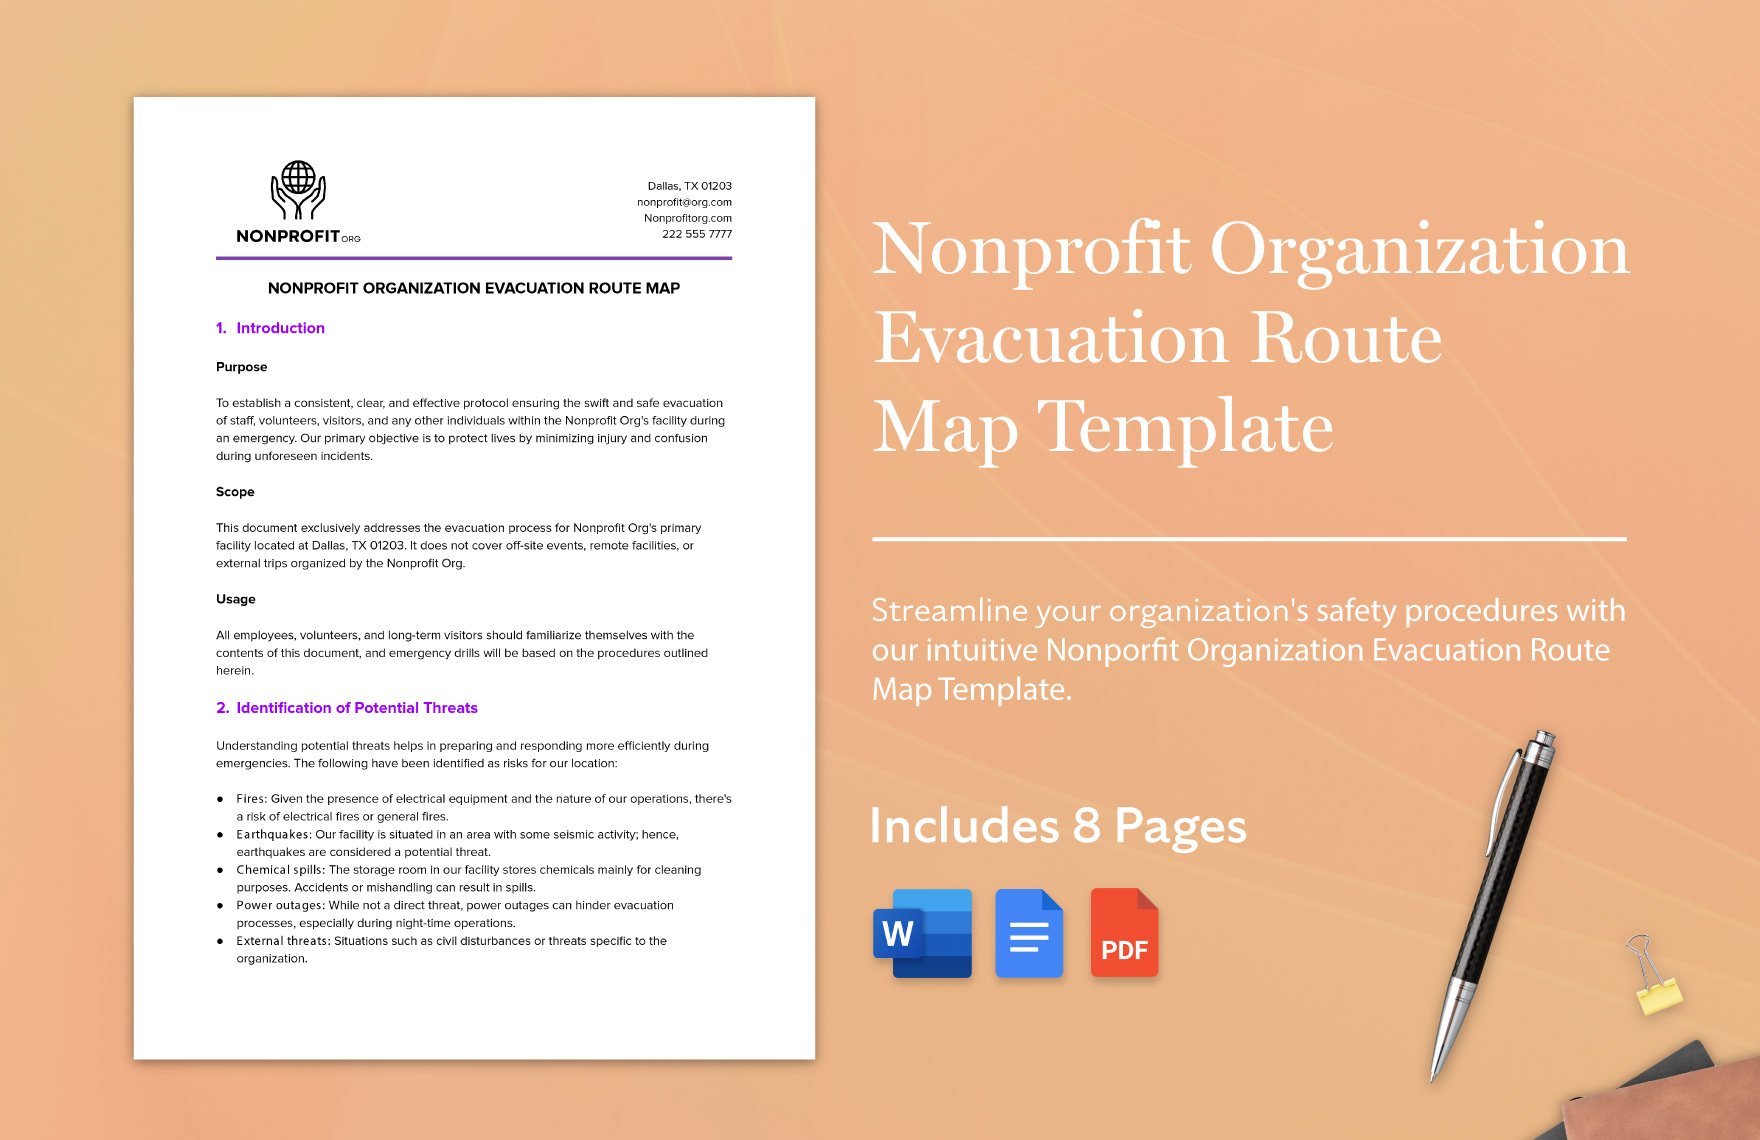 Nonprofit Organization Evacuation Route Map Template in Word, Google Docs, PDF